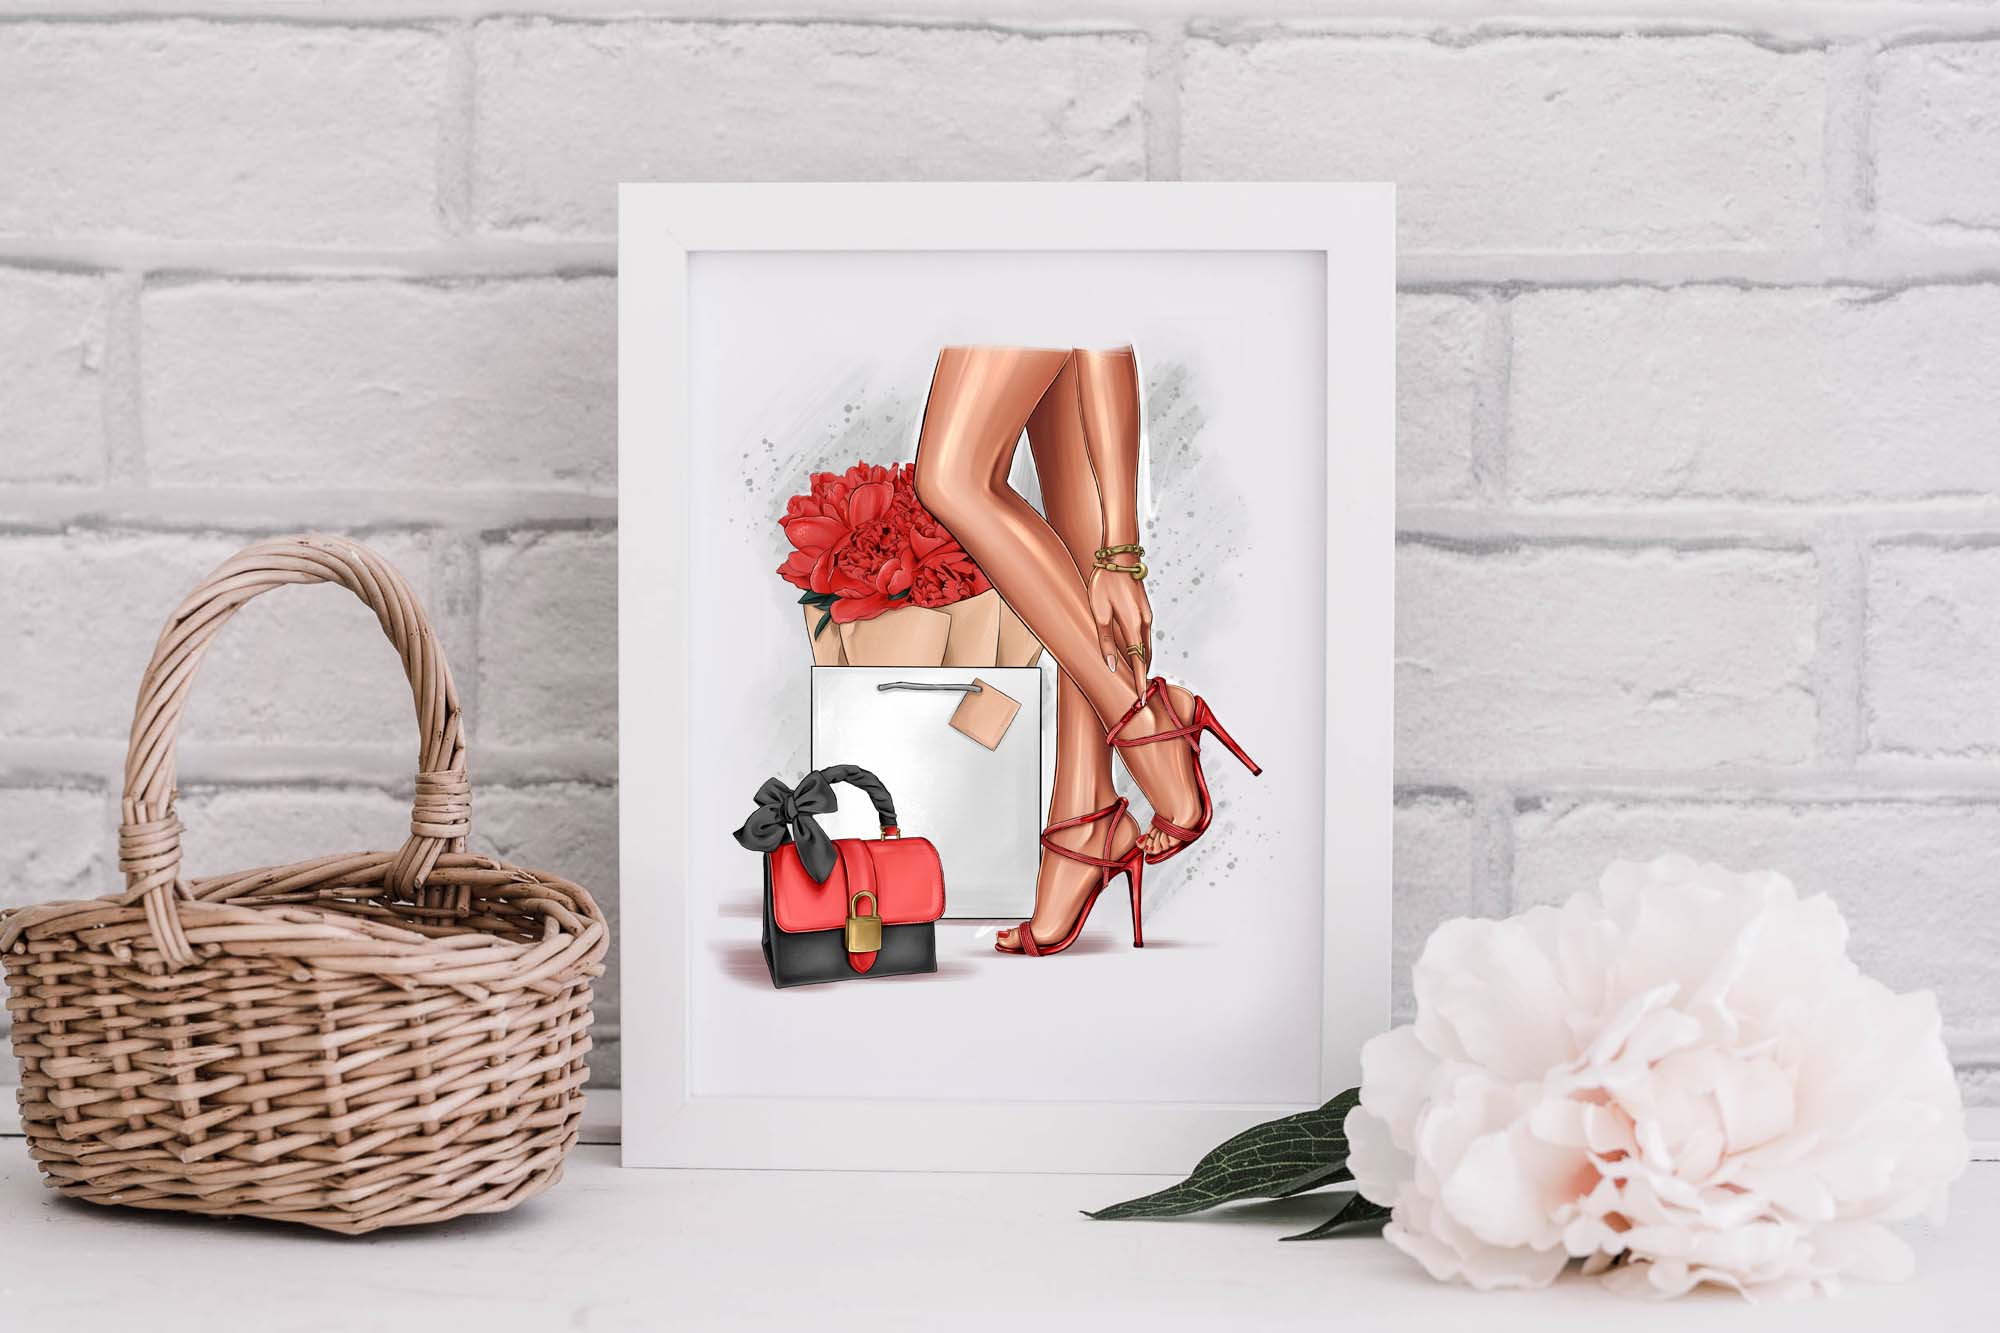 Fashion Illustration Foot Shoes Art Poster In Frame.